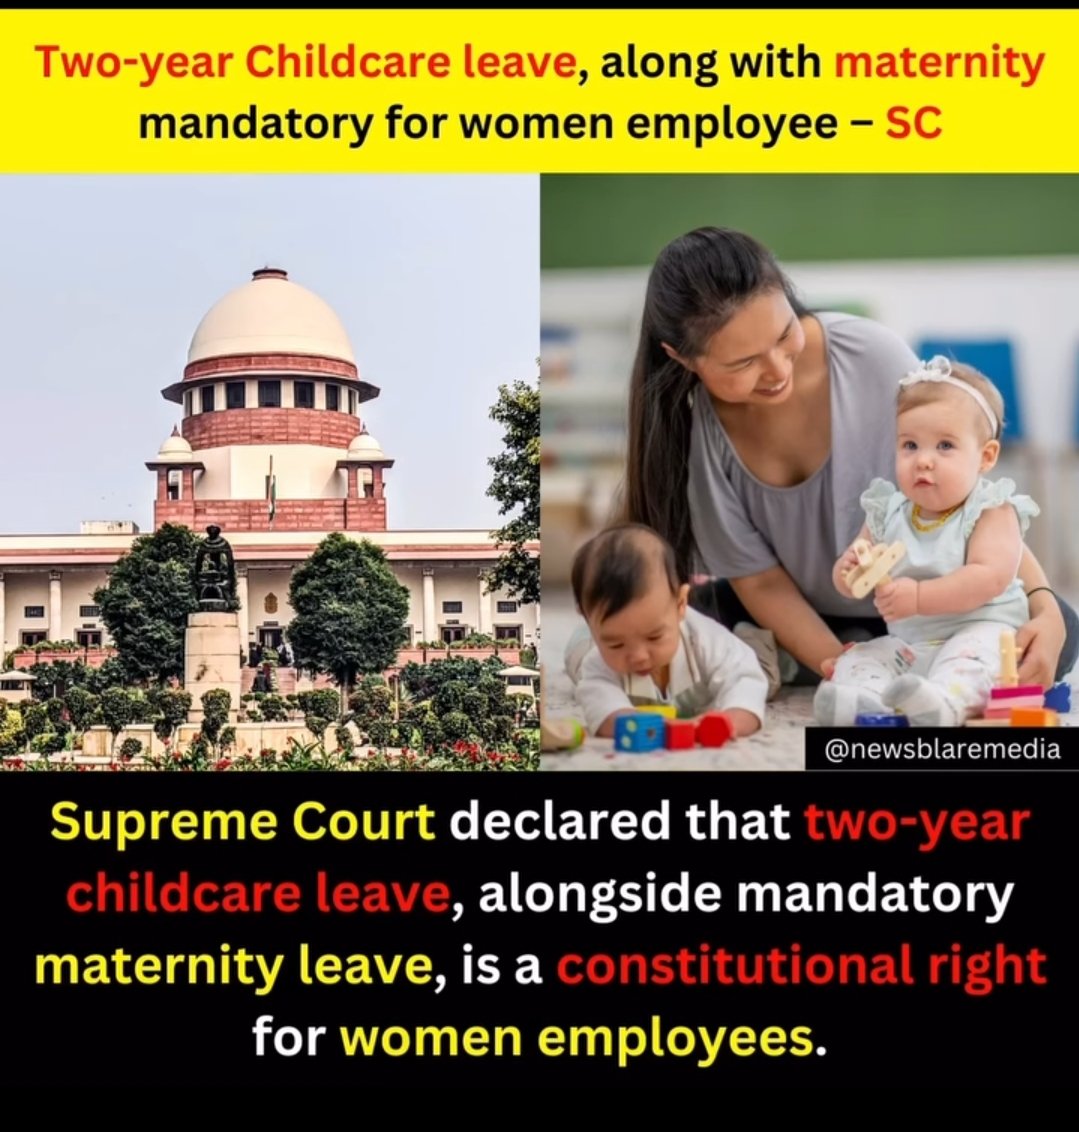 If this is true,  well done #SC. 
#maternityleave #WomenEmpowerment 

Most of my friends who are scared of starting family coz that means they have to lose their jobs and restart from scratch when they want to rejoin. It' was unfair to them, but hope this changes things. 🙏